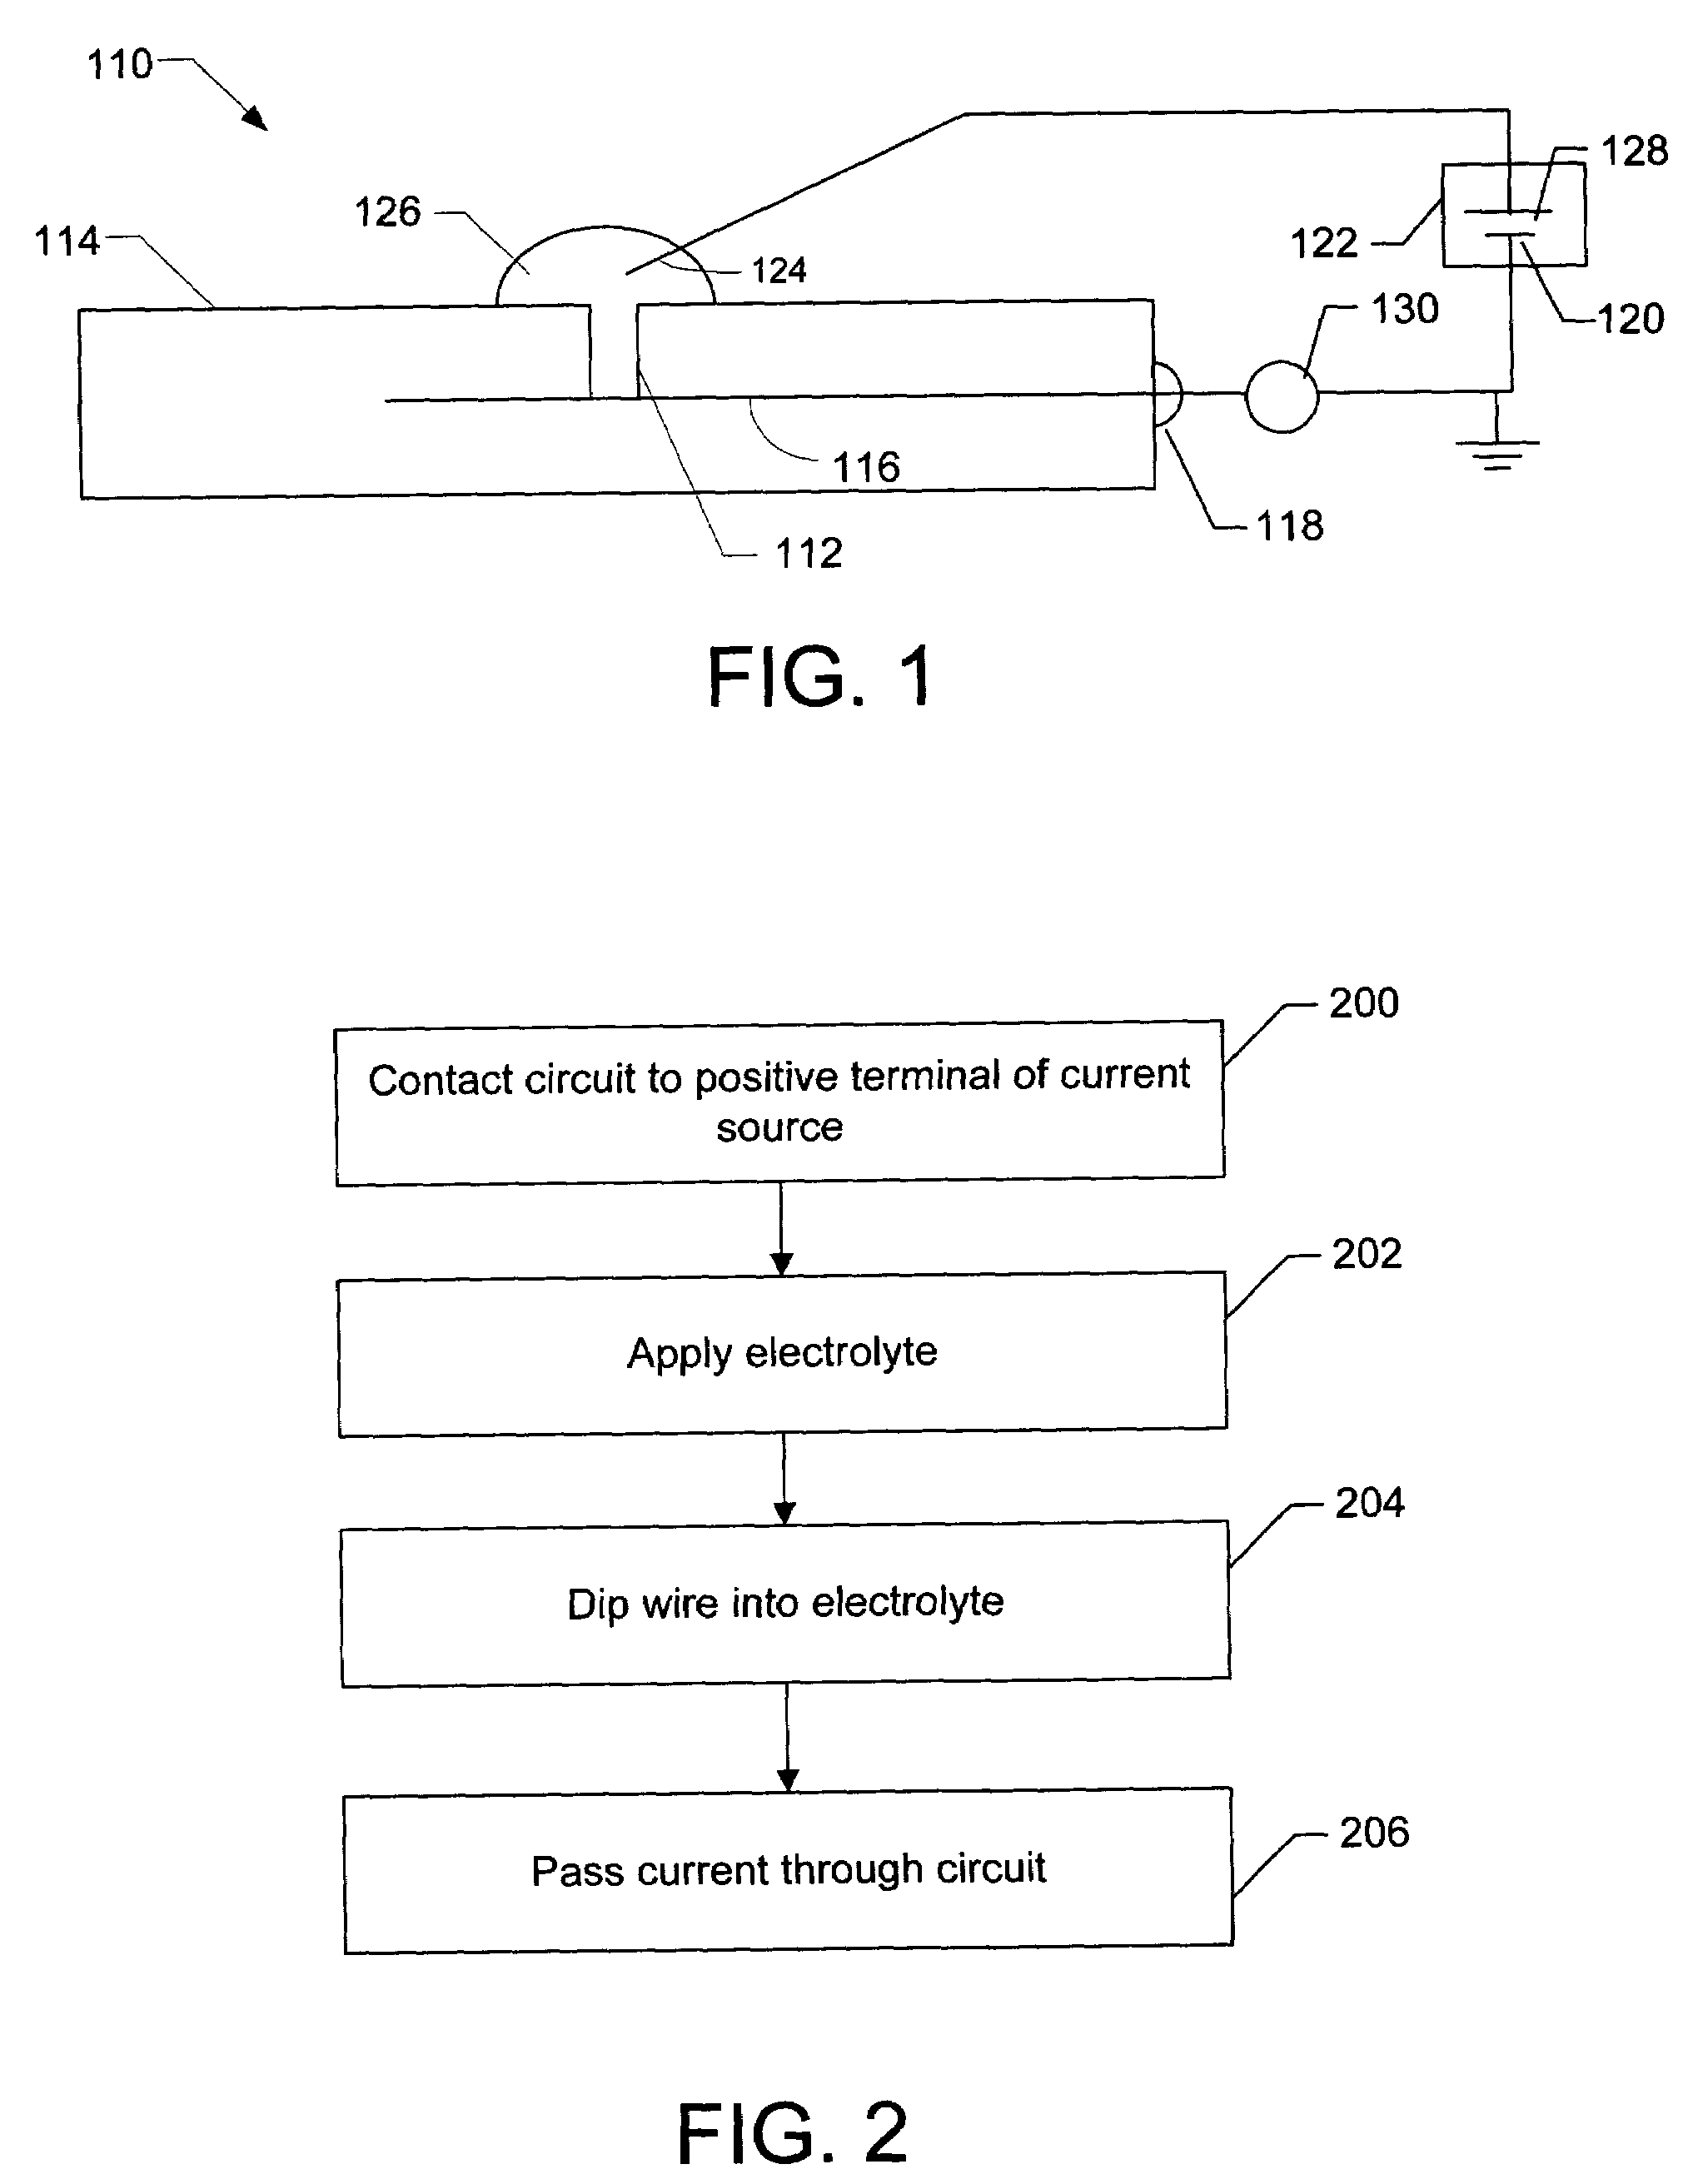 System for modifying small structures using localized charge transfer mechanism to remove or deposit material